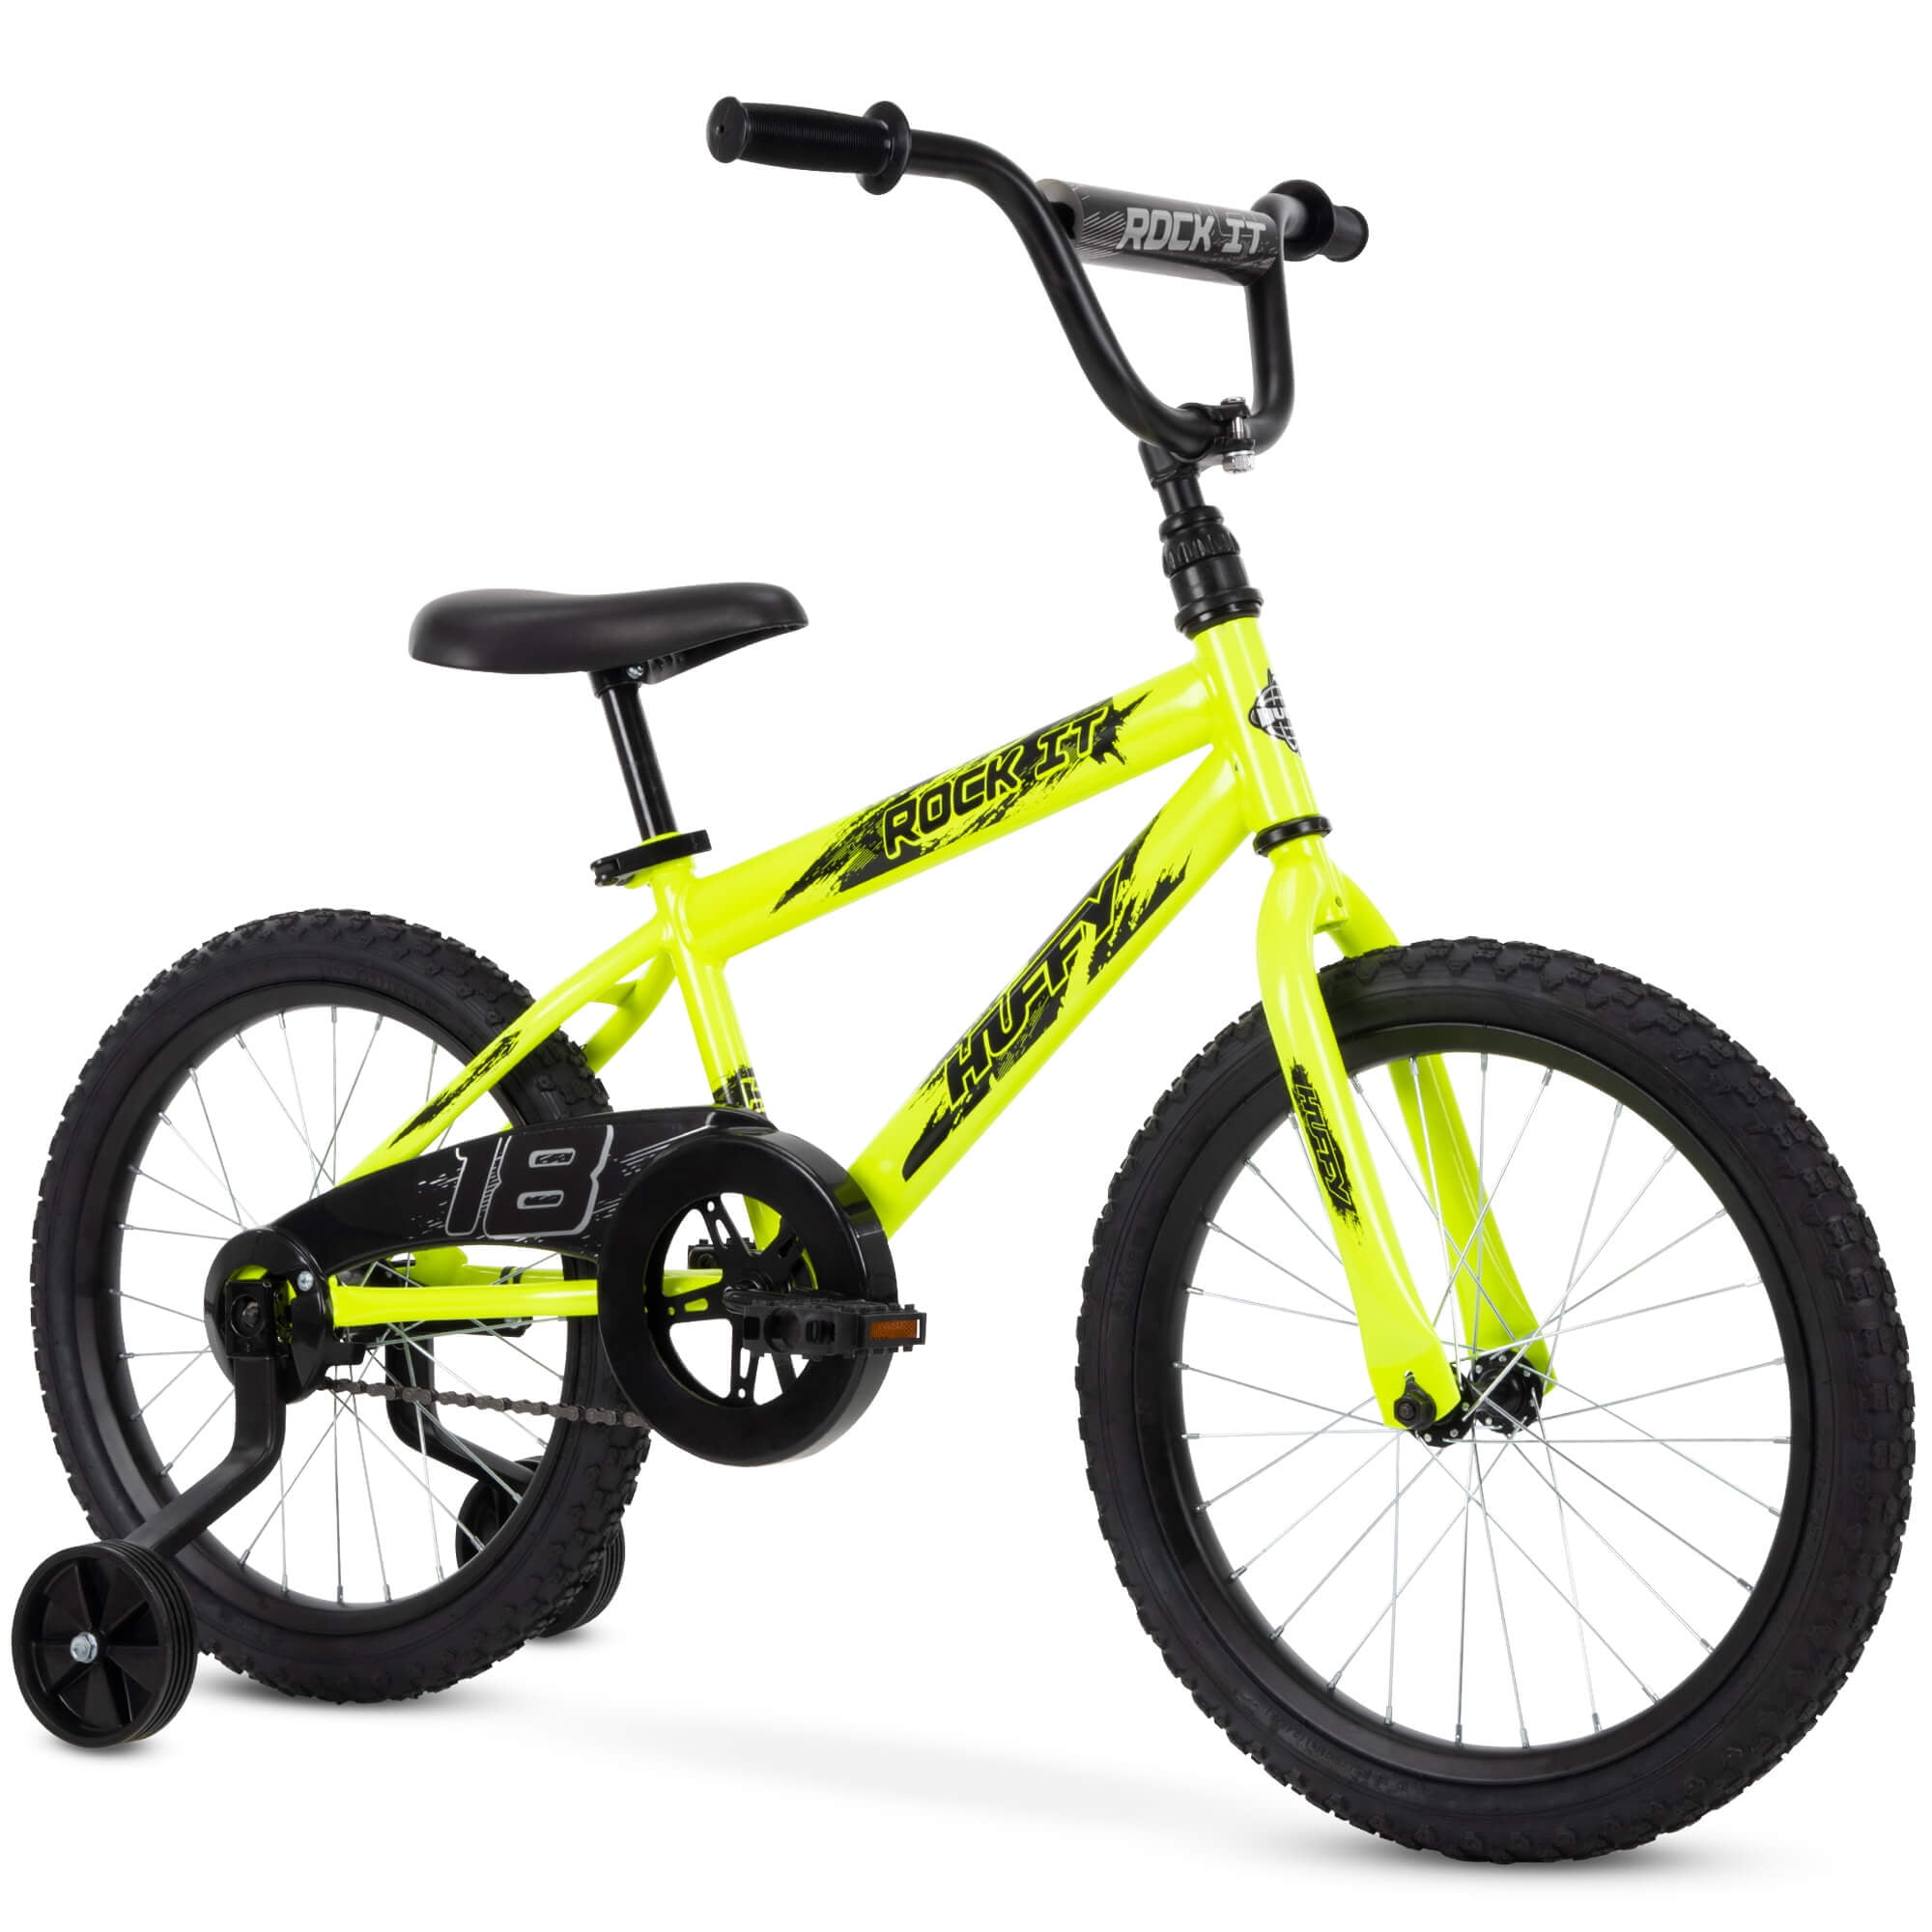 Kent 31826 Abyss 18" Boy's Bike with Removable Training Wheels Charcoal for sale online 